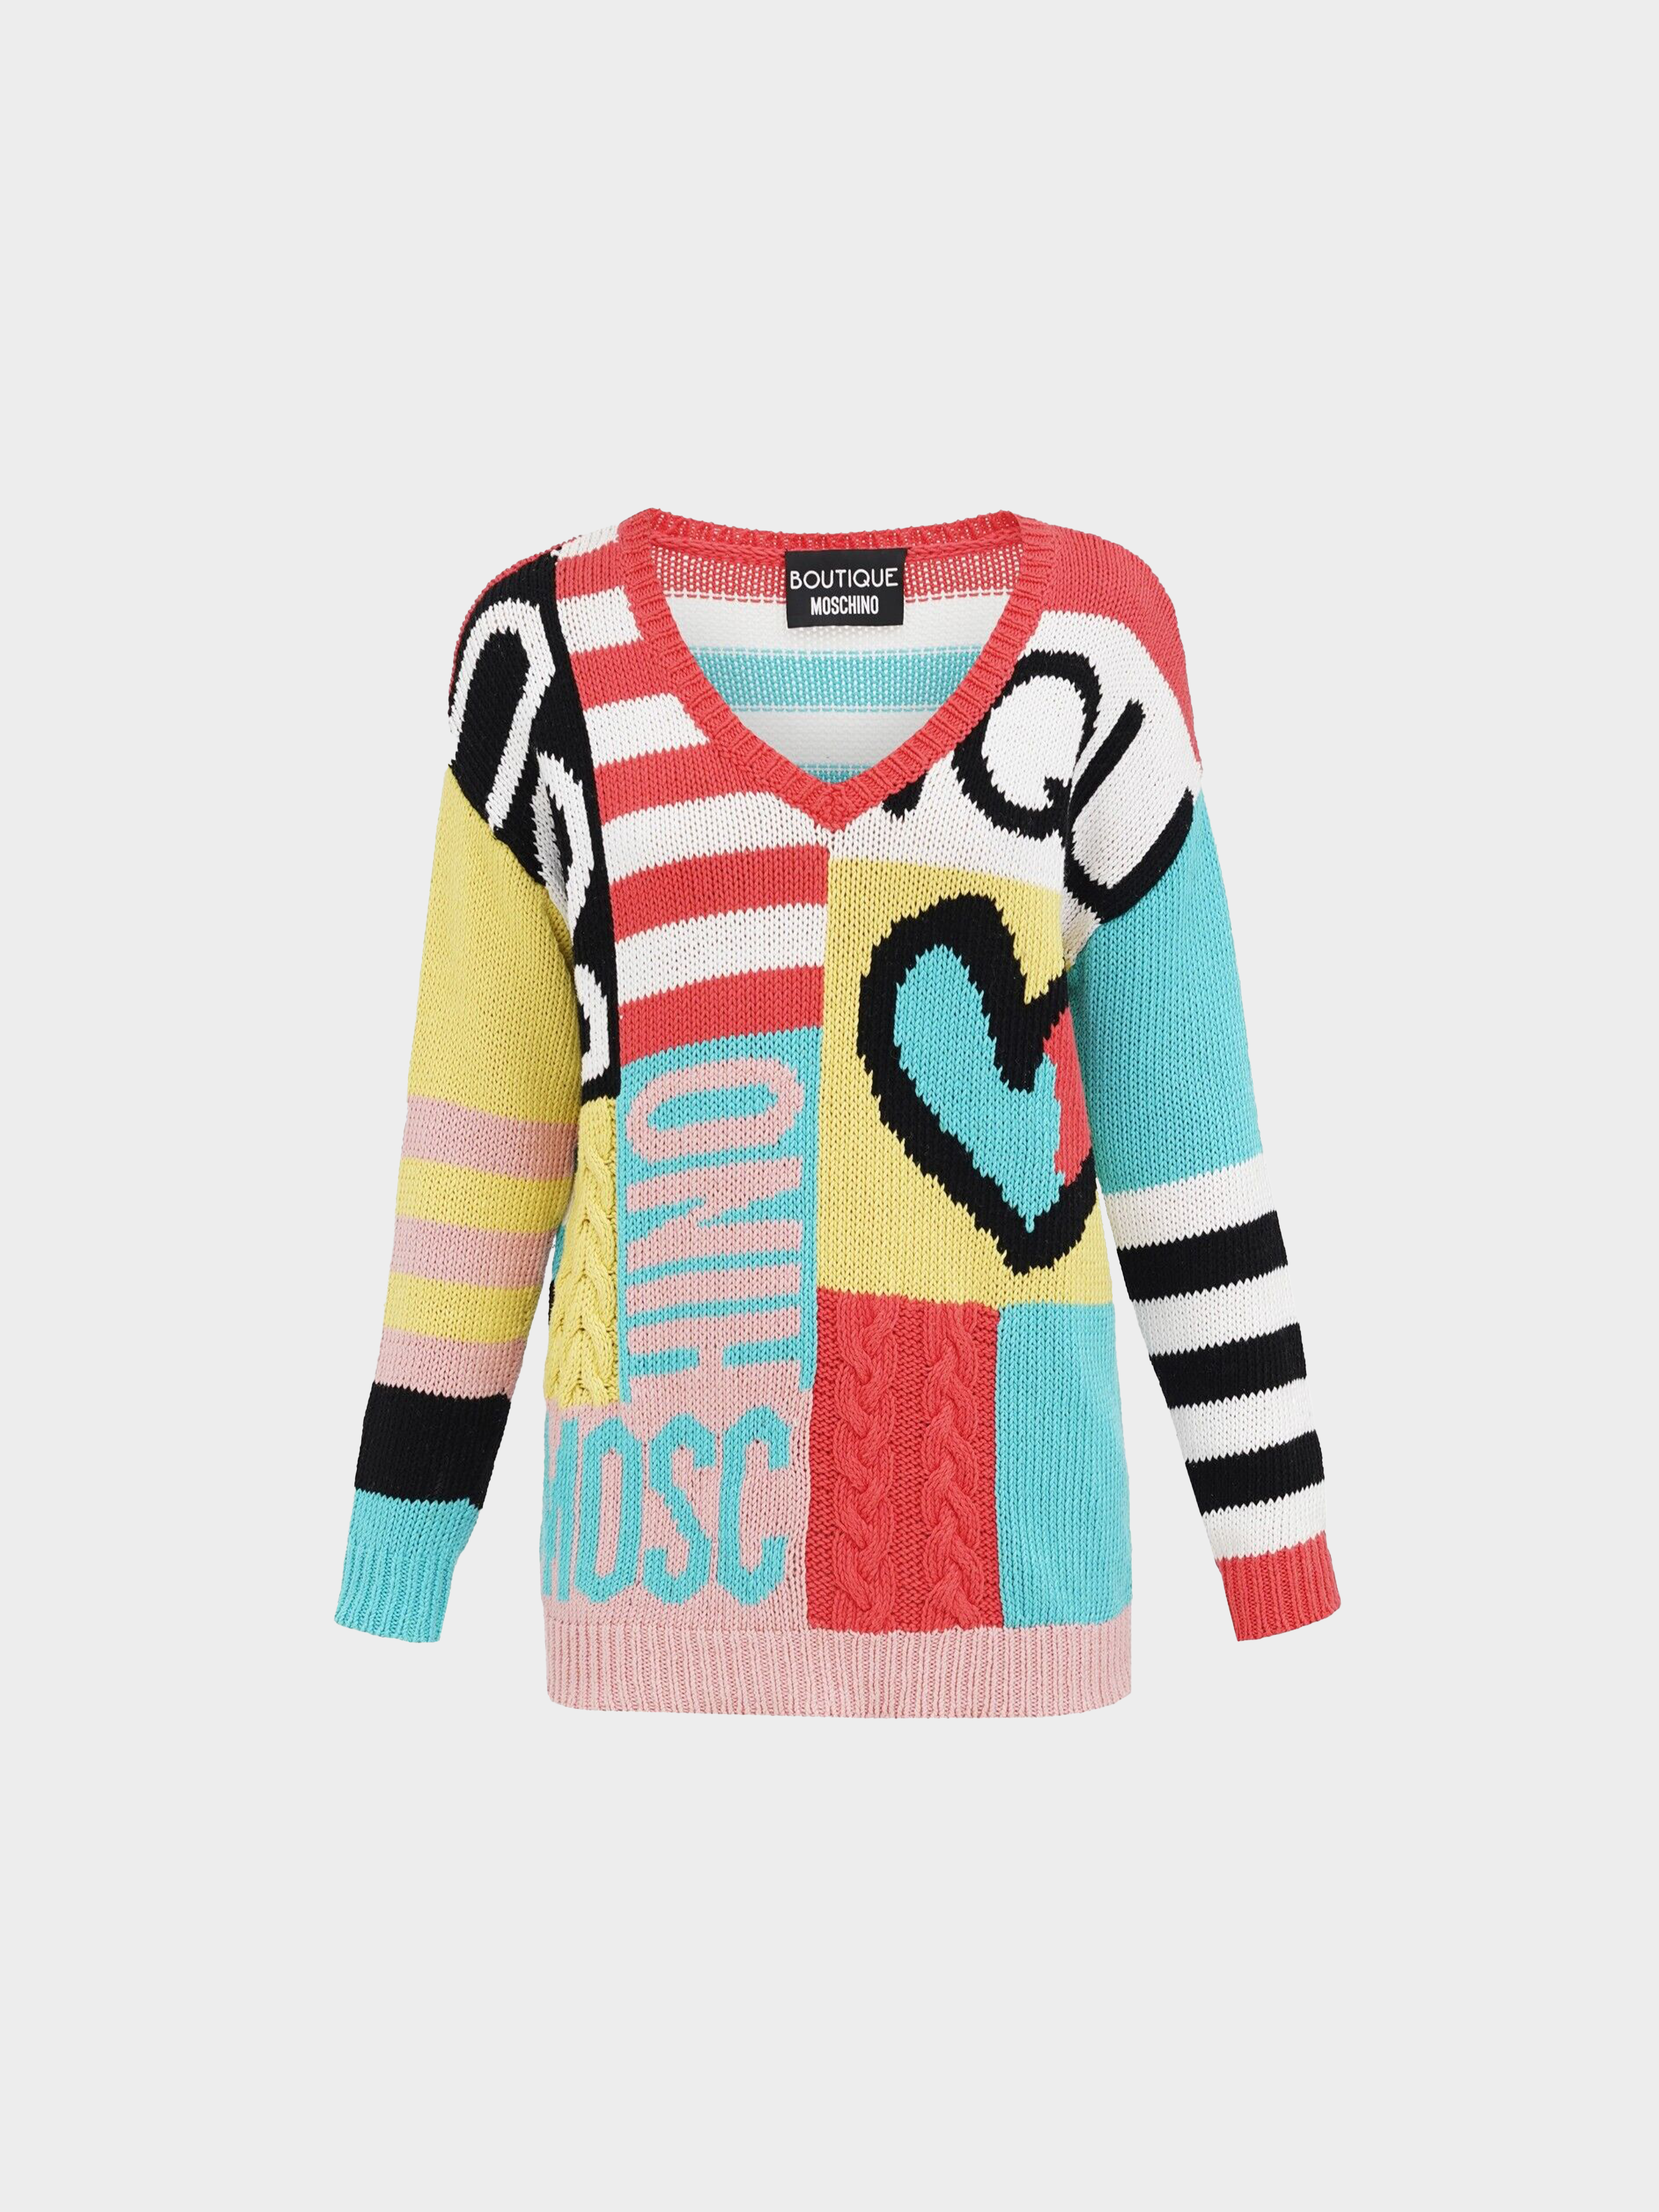 Moschino Boutique 2010s Colorblock Sweater Jumper Knit